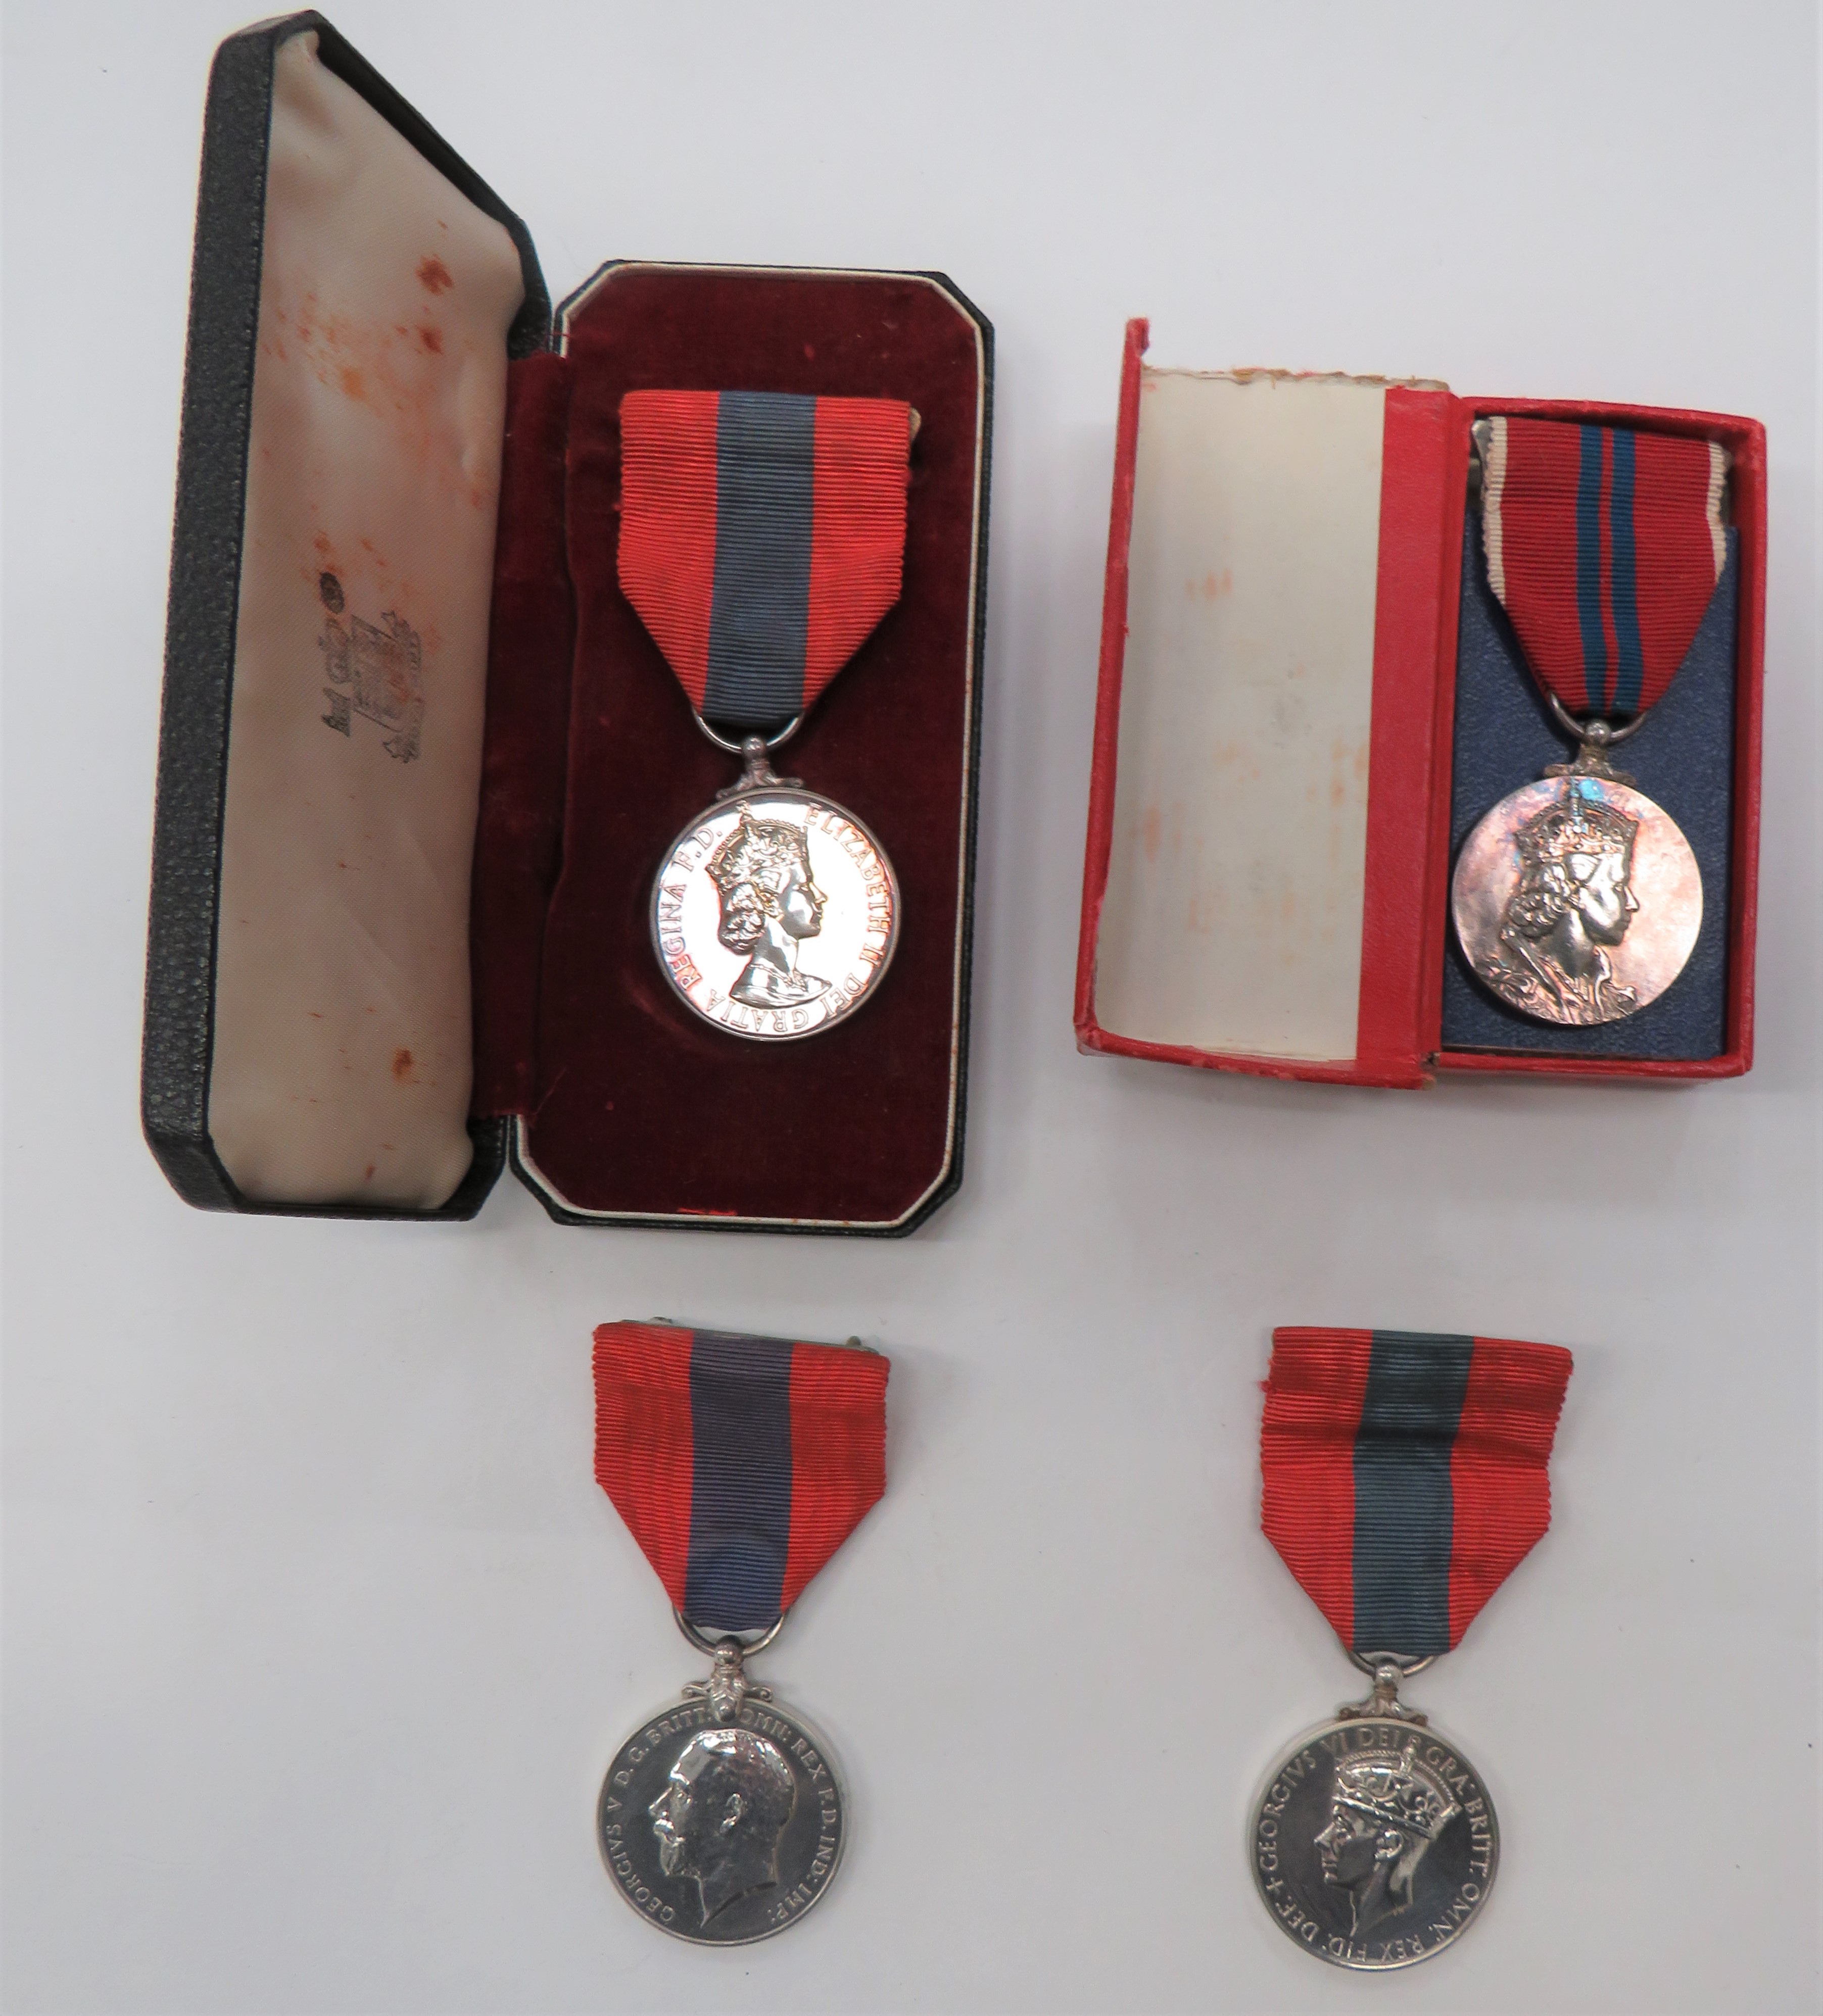 3 x Imperial Service Medals consisting George V example named "Thomas John Hulks" ... George VI